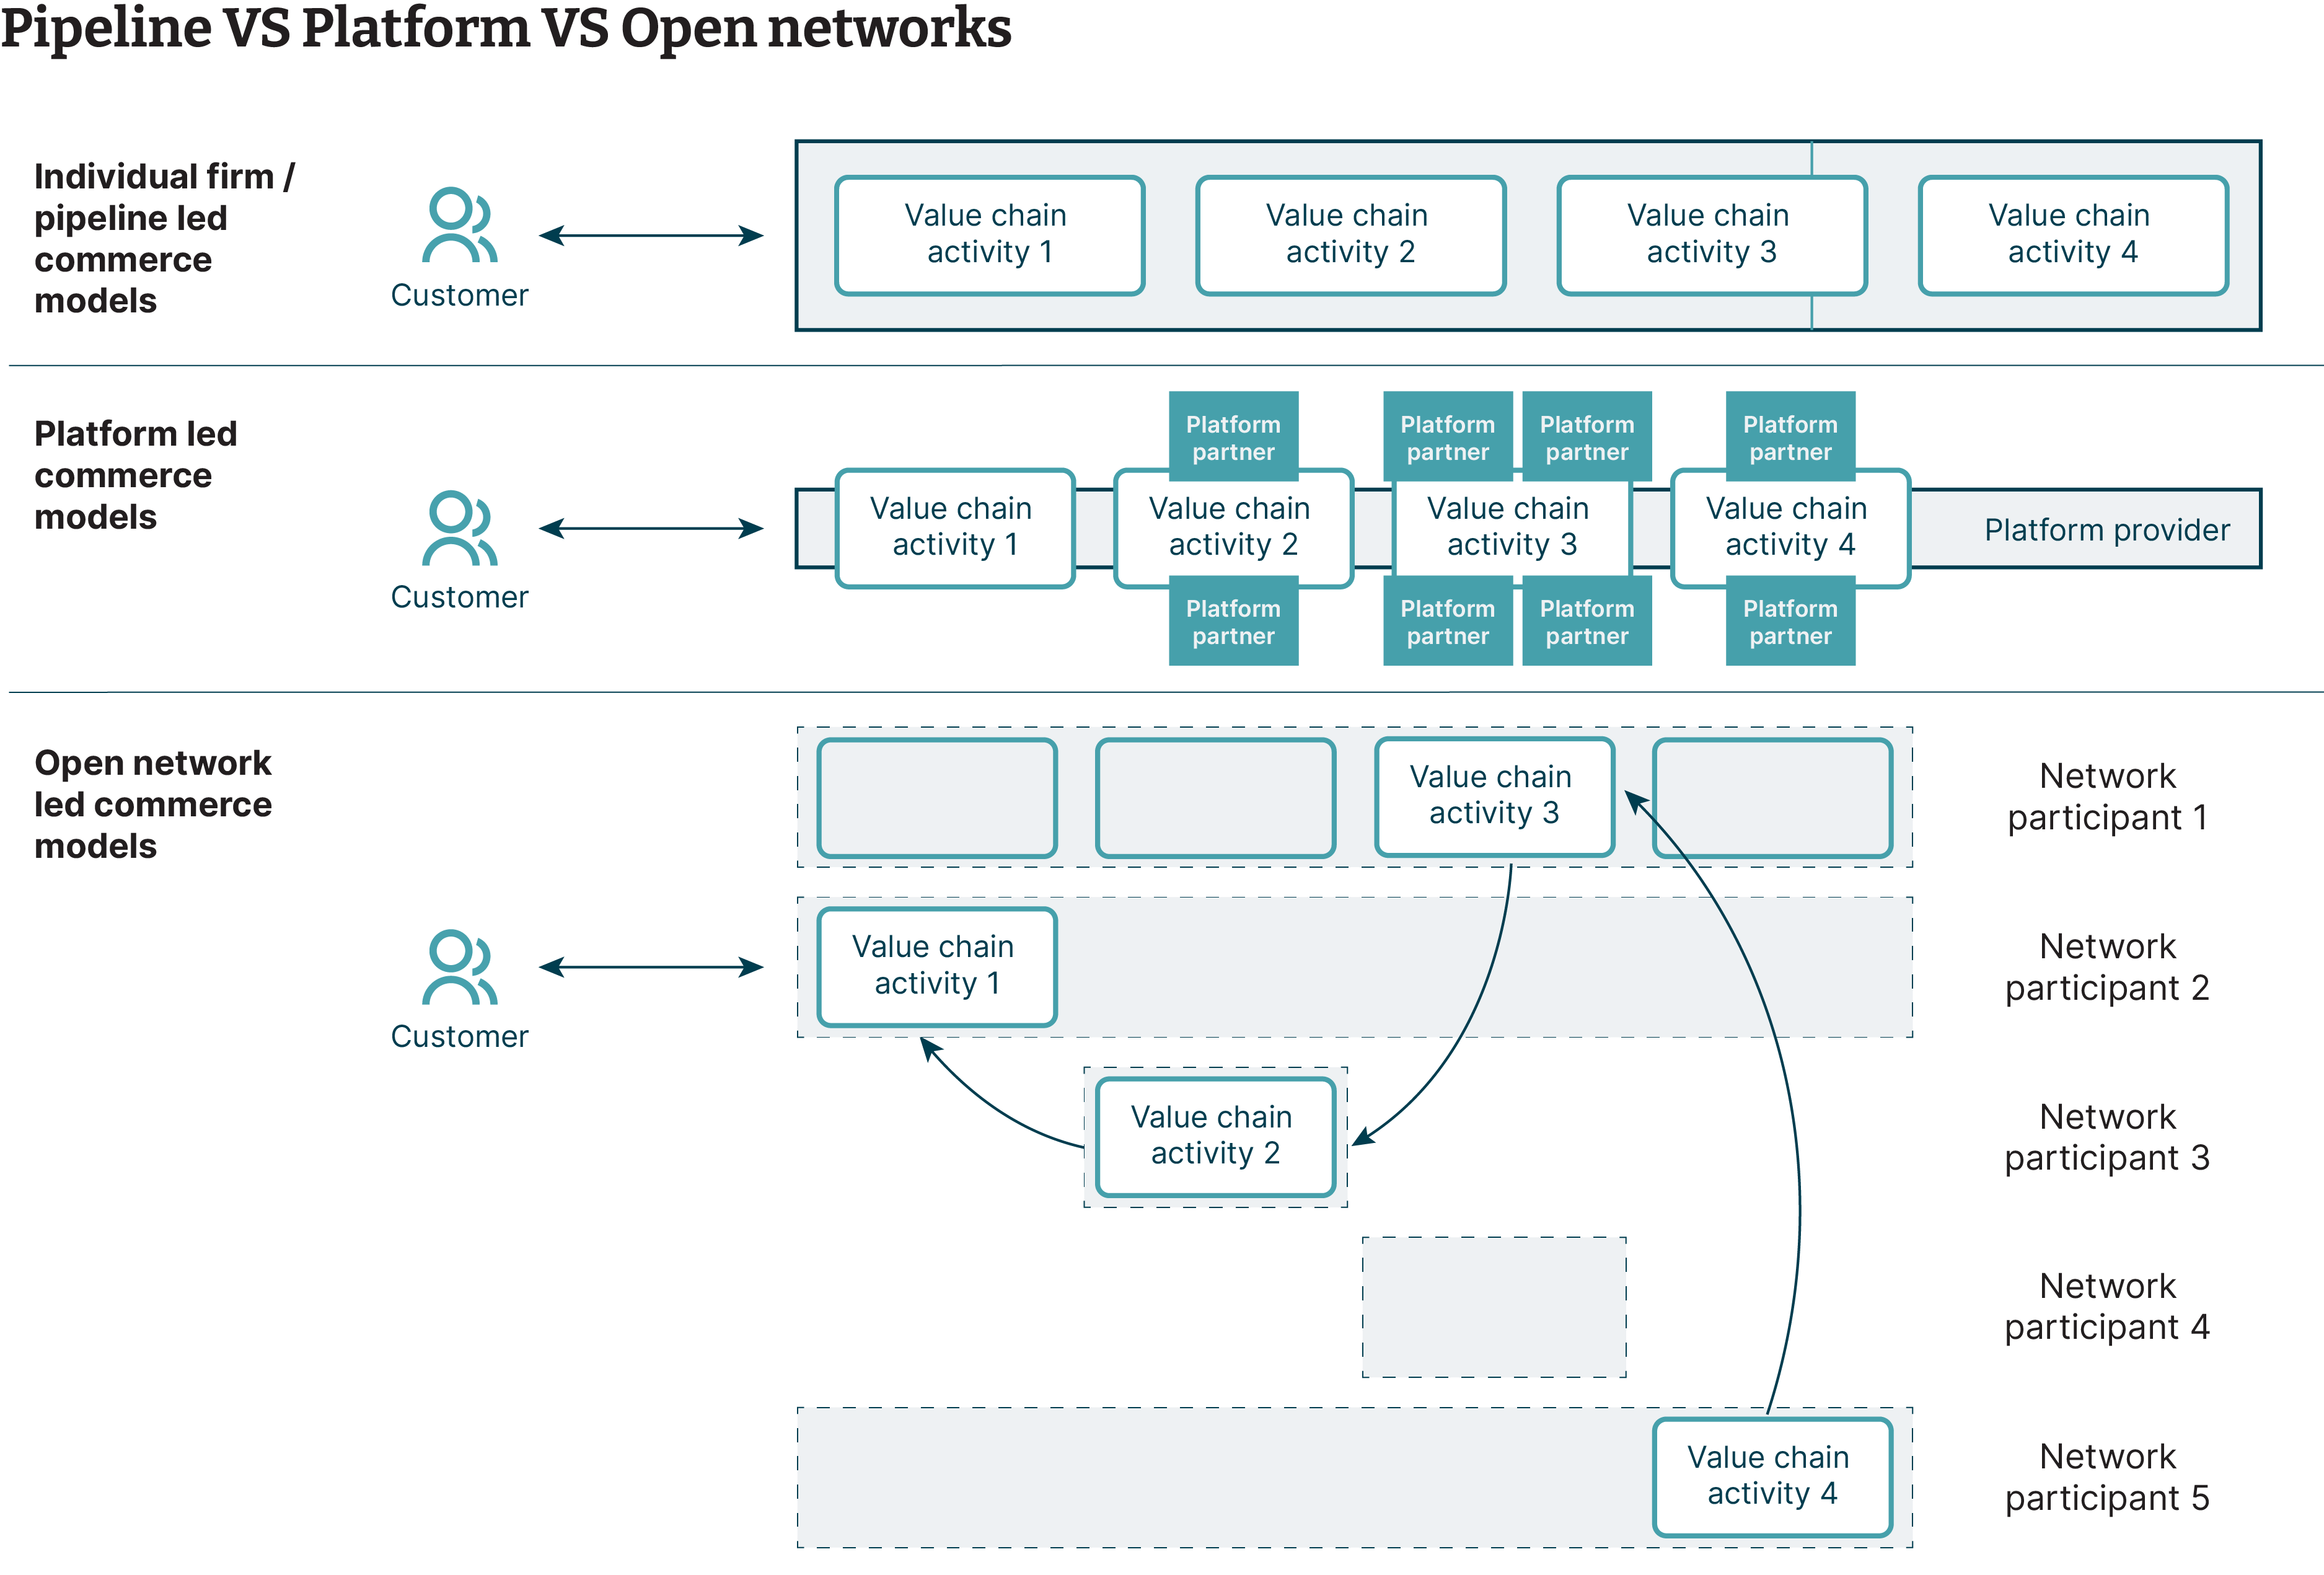 A comparison of pipeline, platform and open network value chains